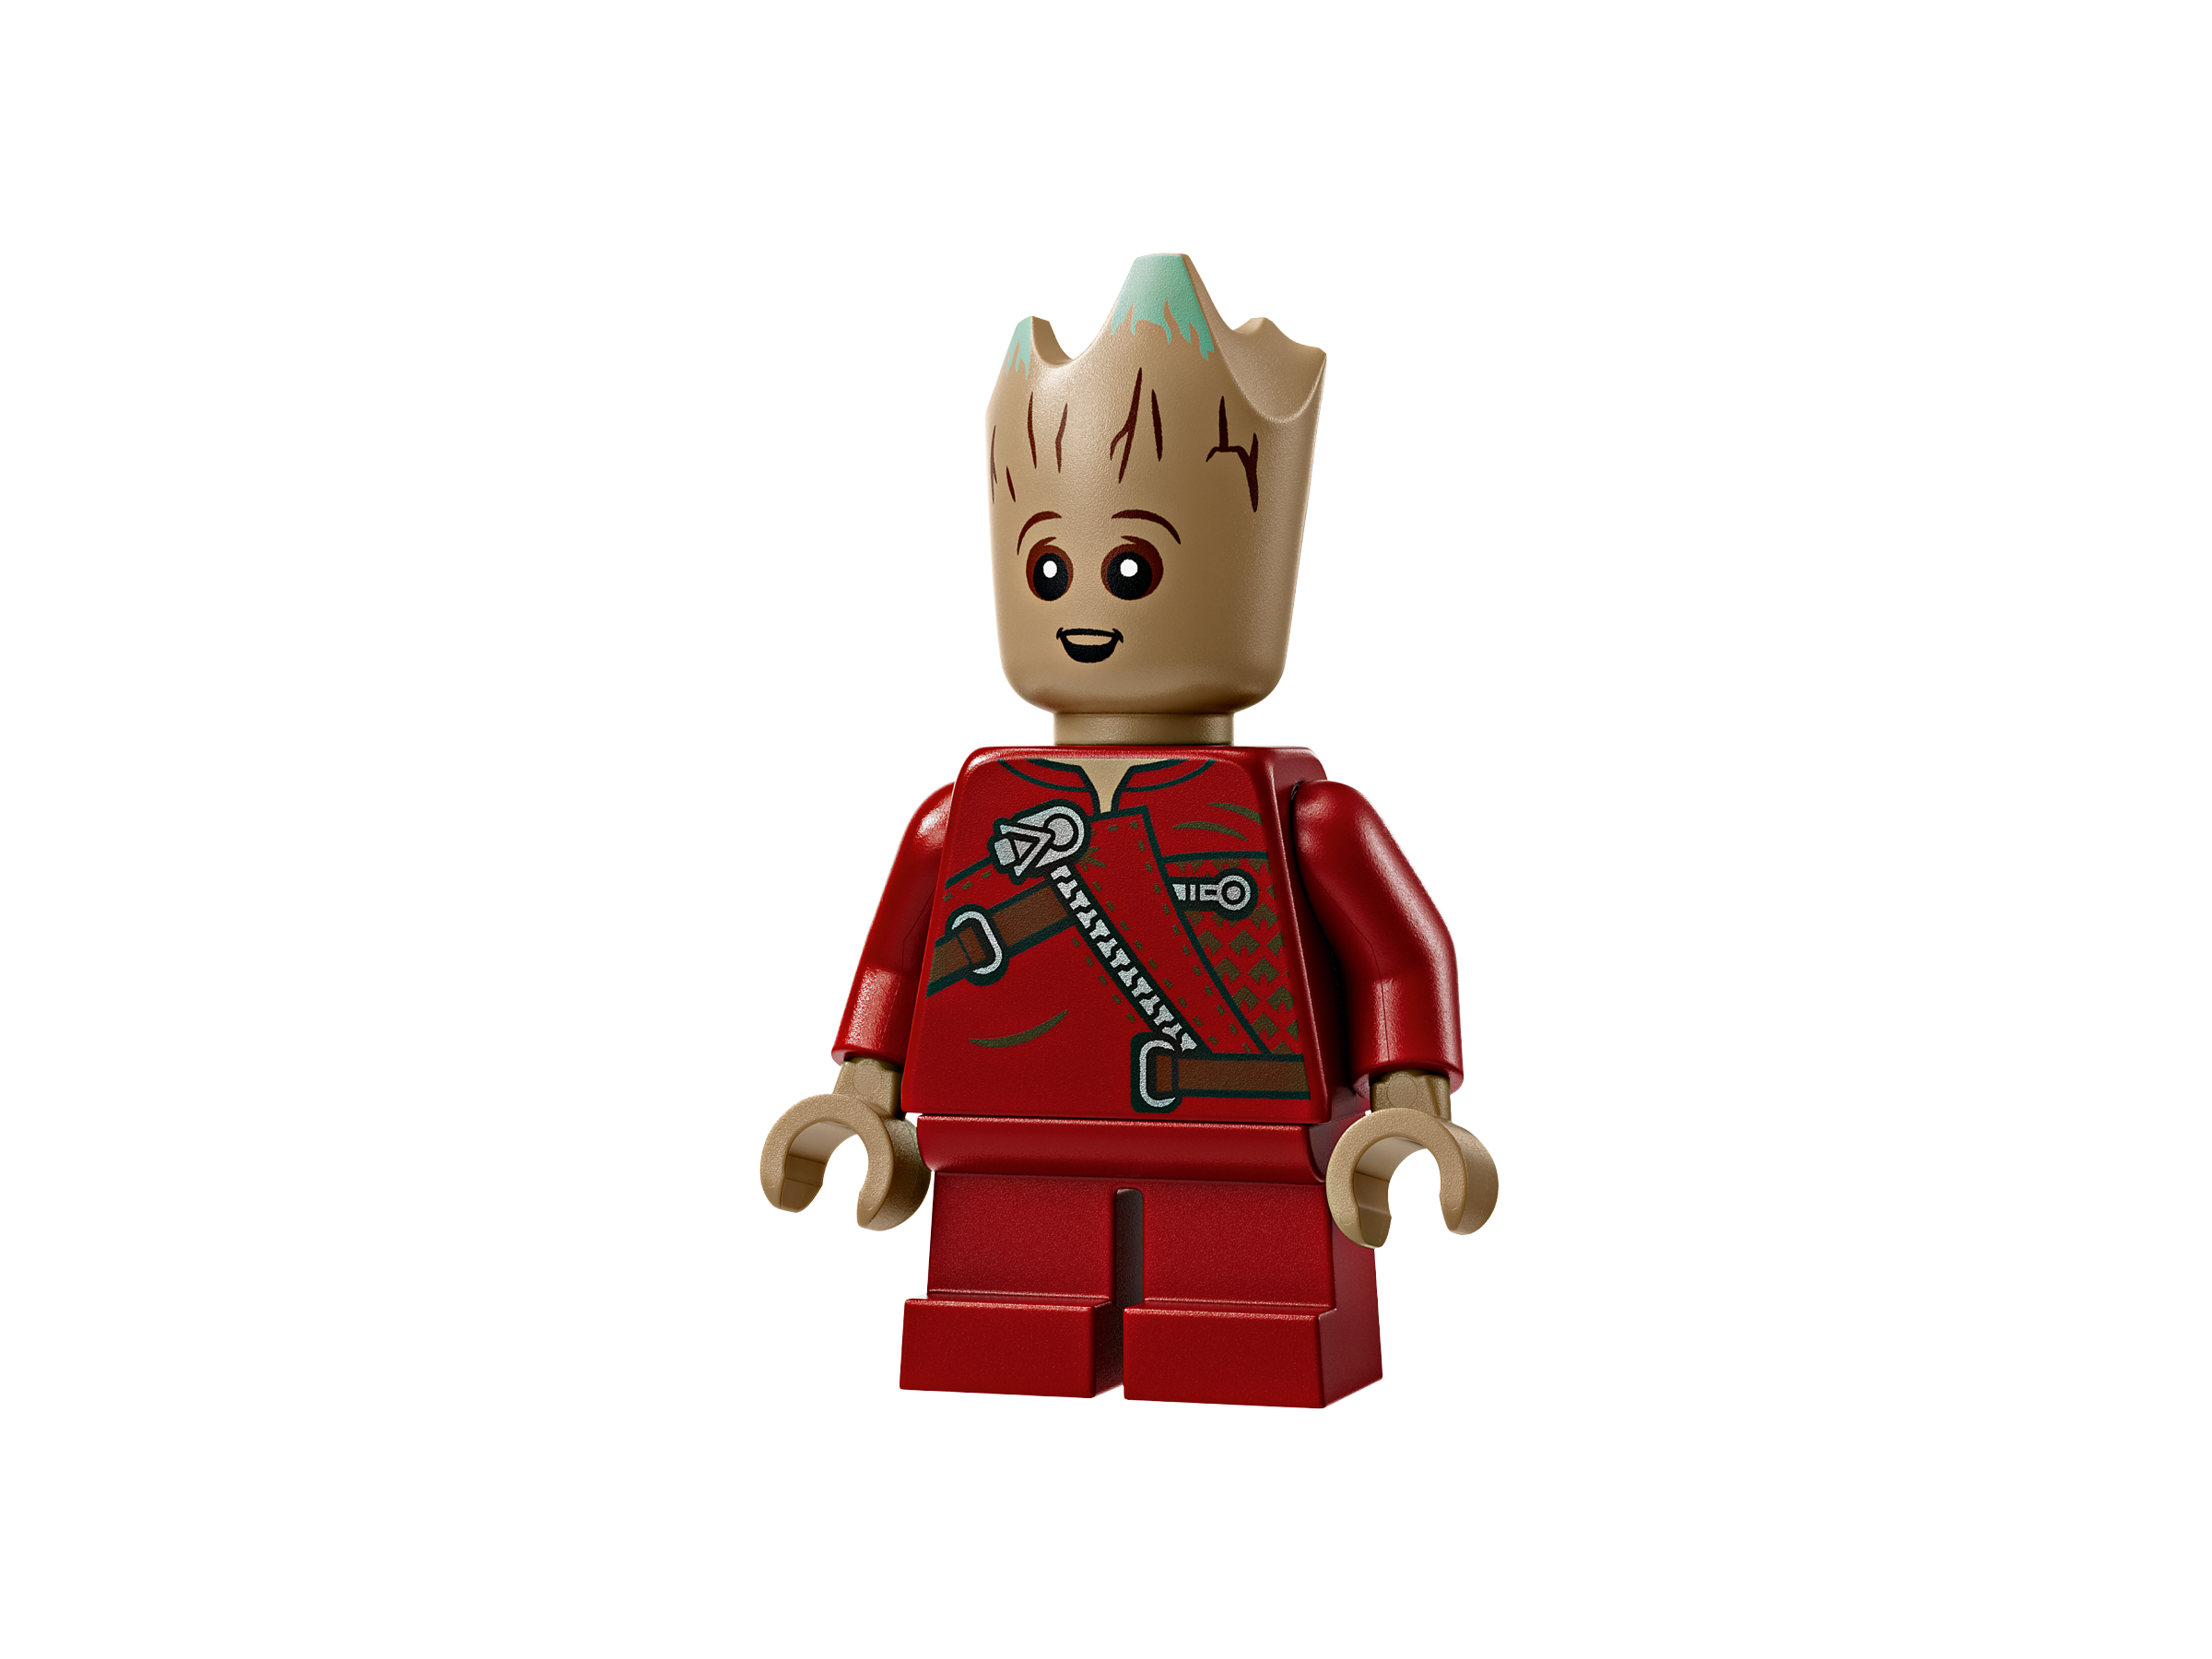 LEGO unveils new Rocket and Groot set from Marve﻿﻿l